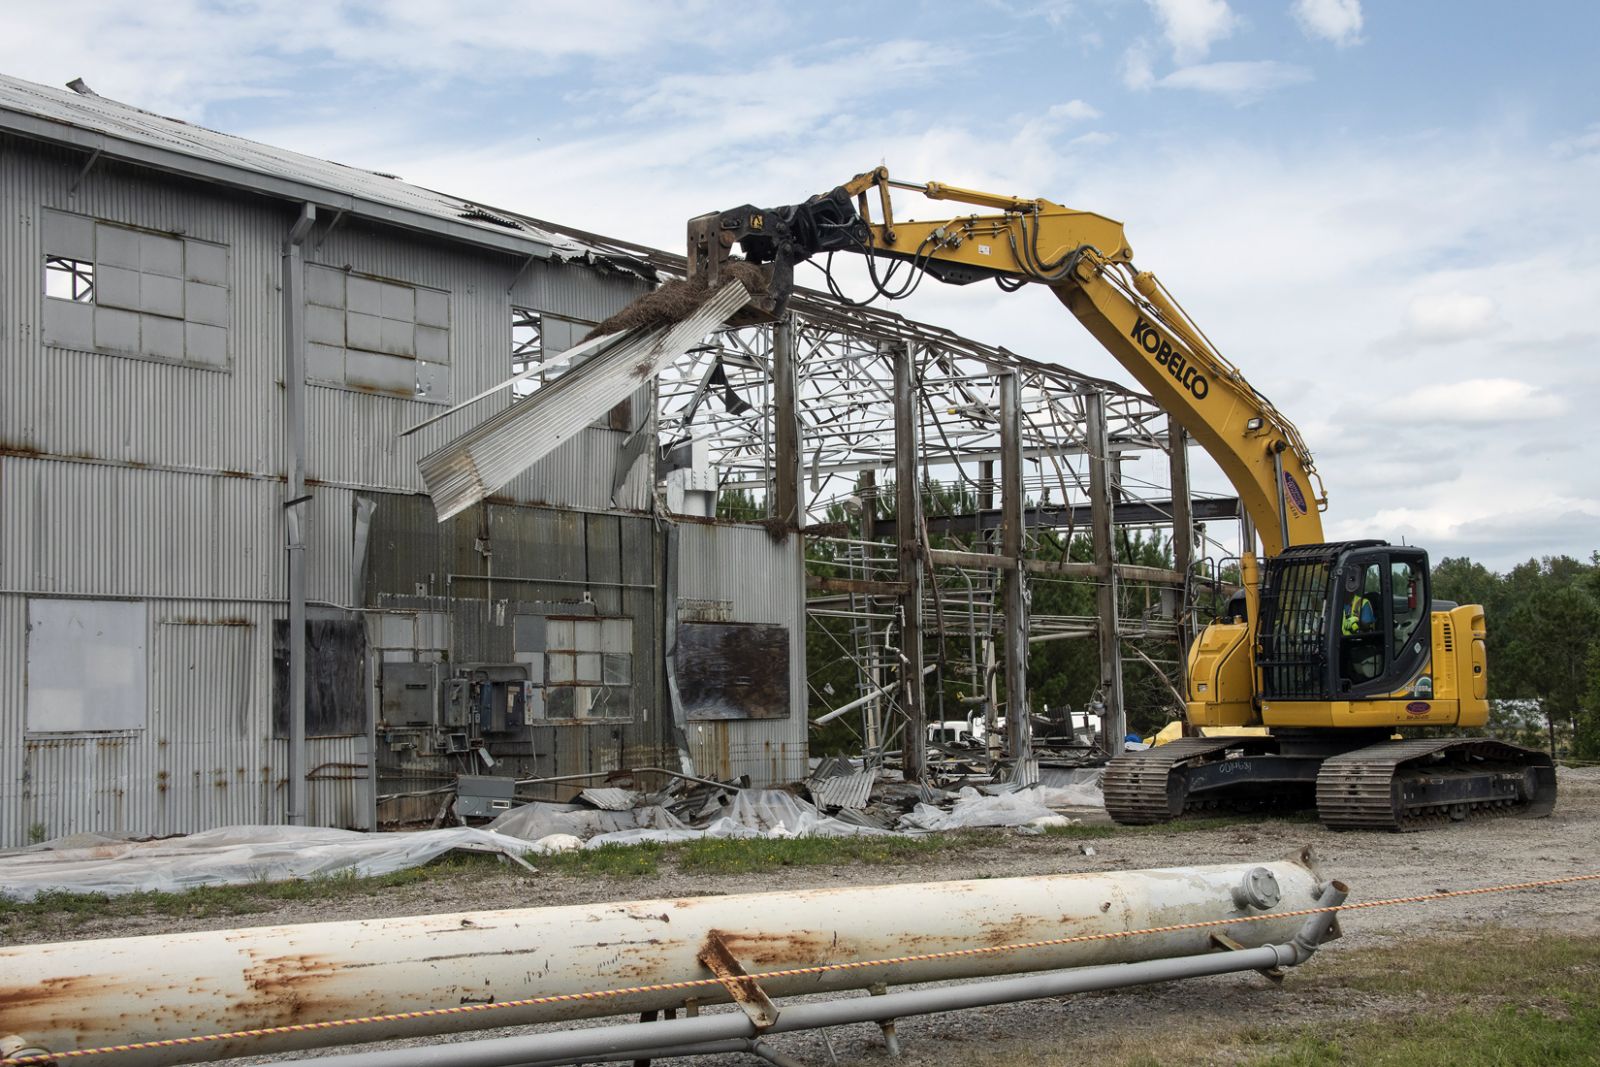 At the height of the Cold War, the Ford Building was used to test components used in five nuclear reactors at the Savannah River Site. An excavator is shown here removing a section of the facility‰ŰŞs metal roof. (Photo/Provided)